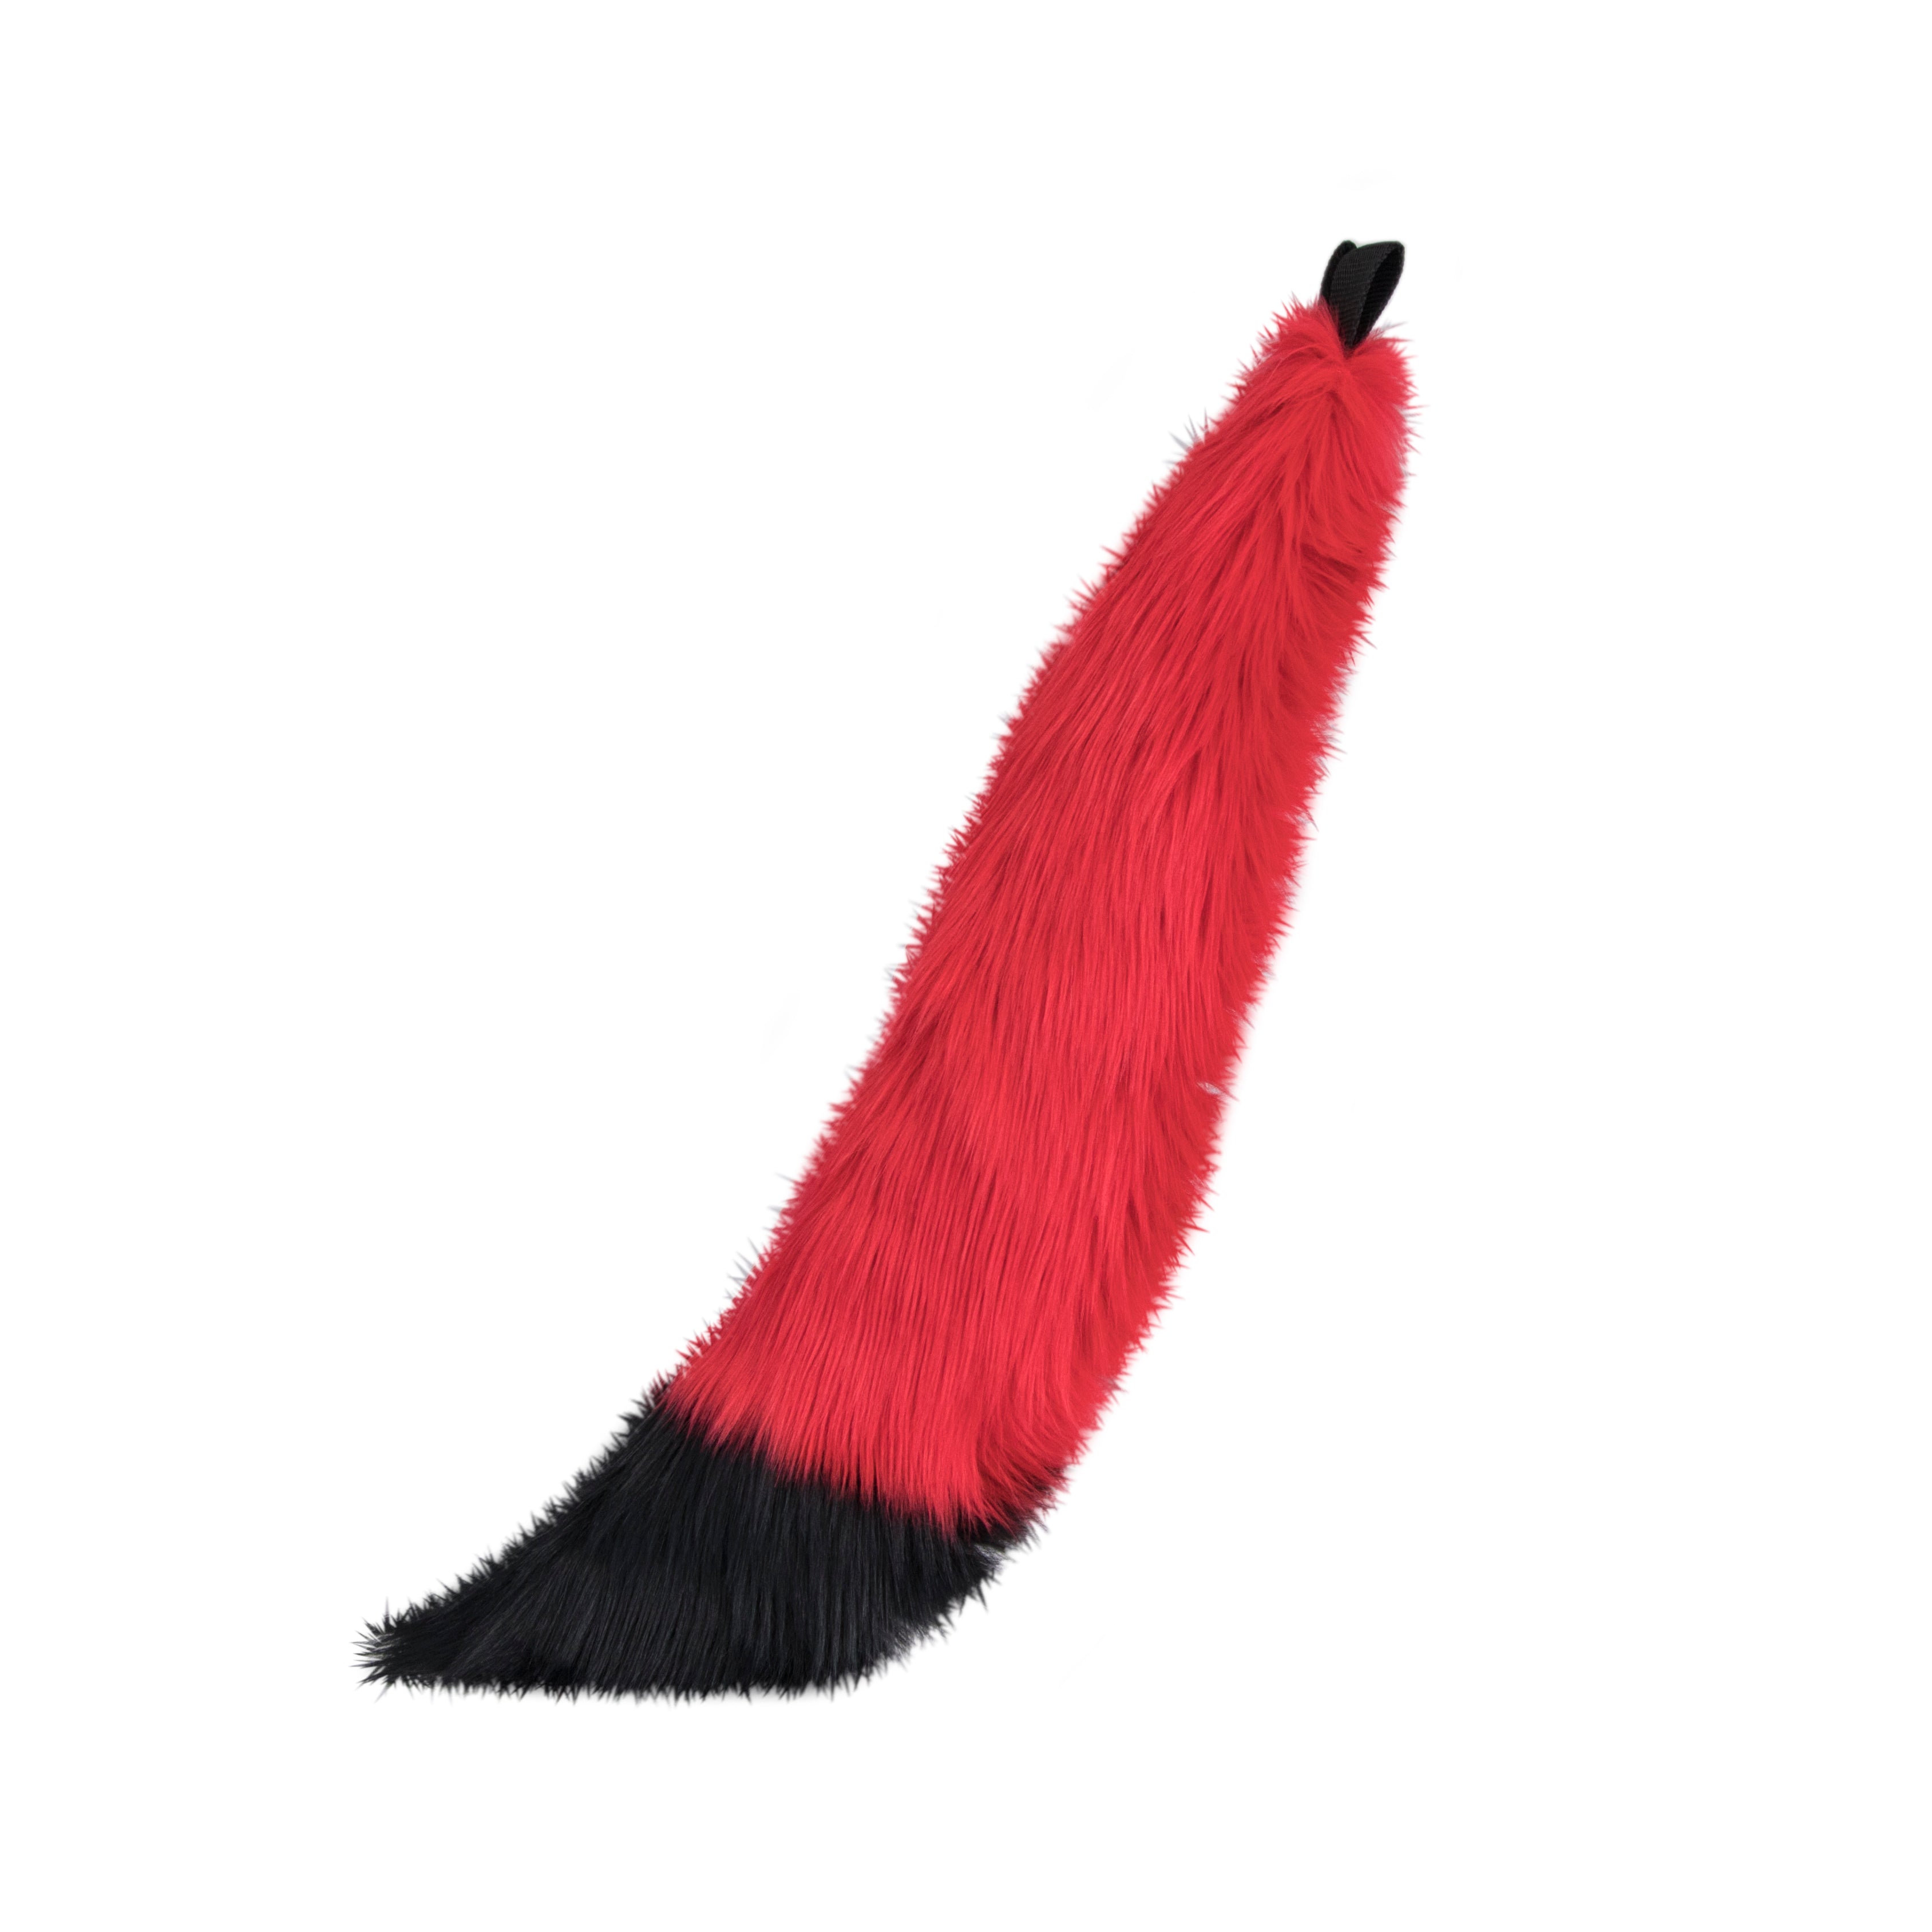 red Pawstar fluffy furry costume mini fox tail. Great for Halloween, Parties, and more.